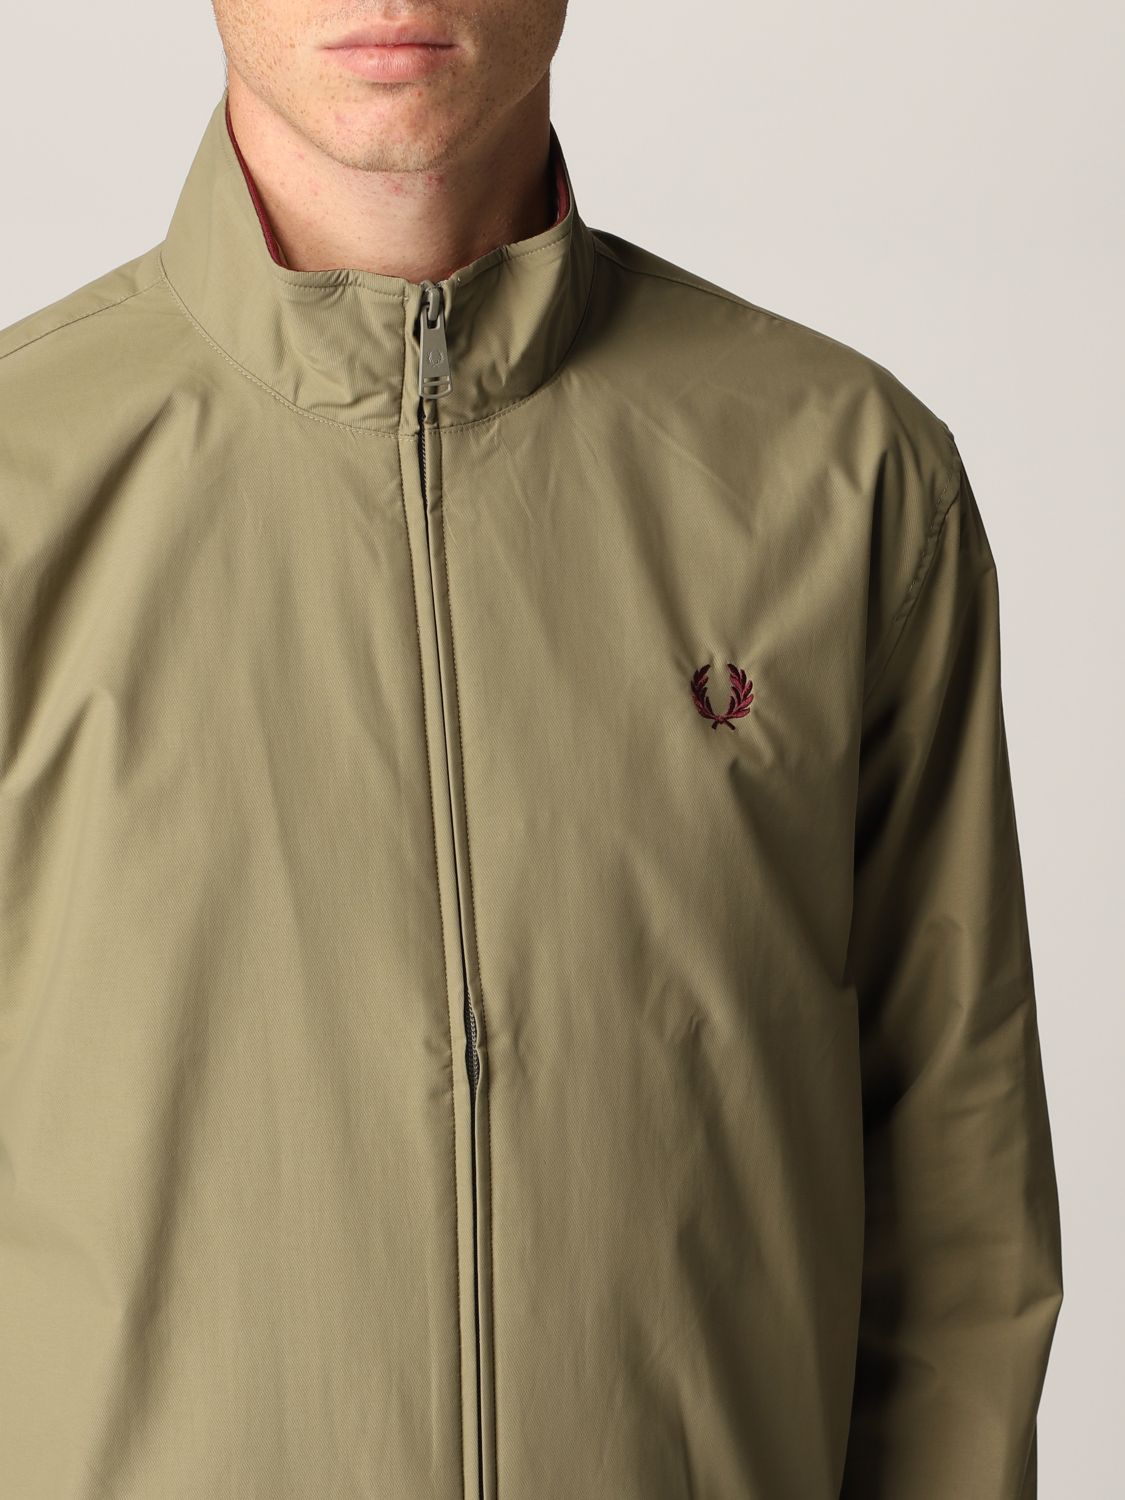 FRED PERRY: jacket in twill | Jacket Perry Men Sand | Jacket Fred Perry J2660 GIGLIO.COM